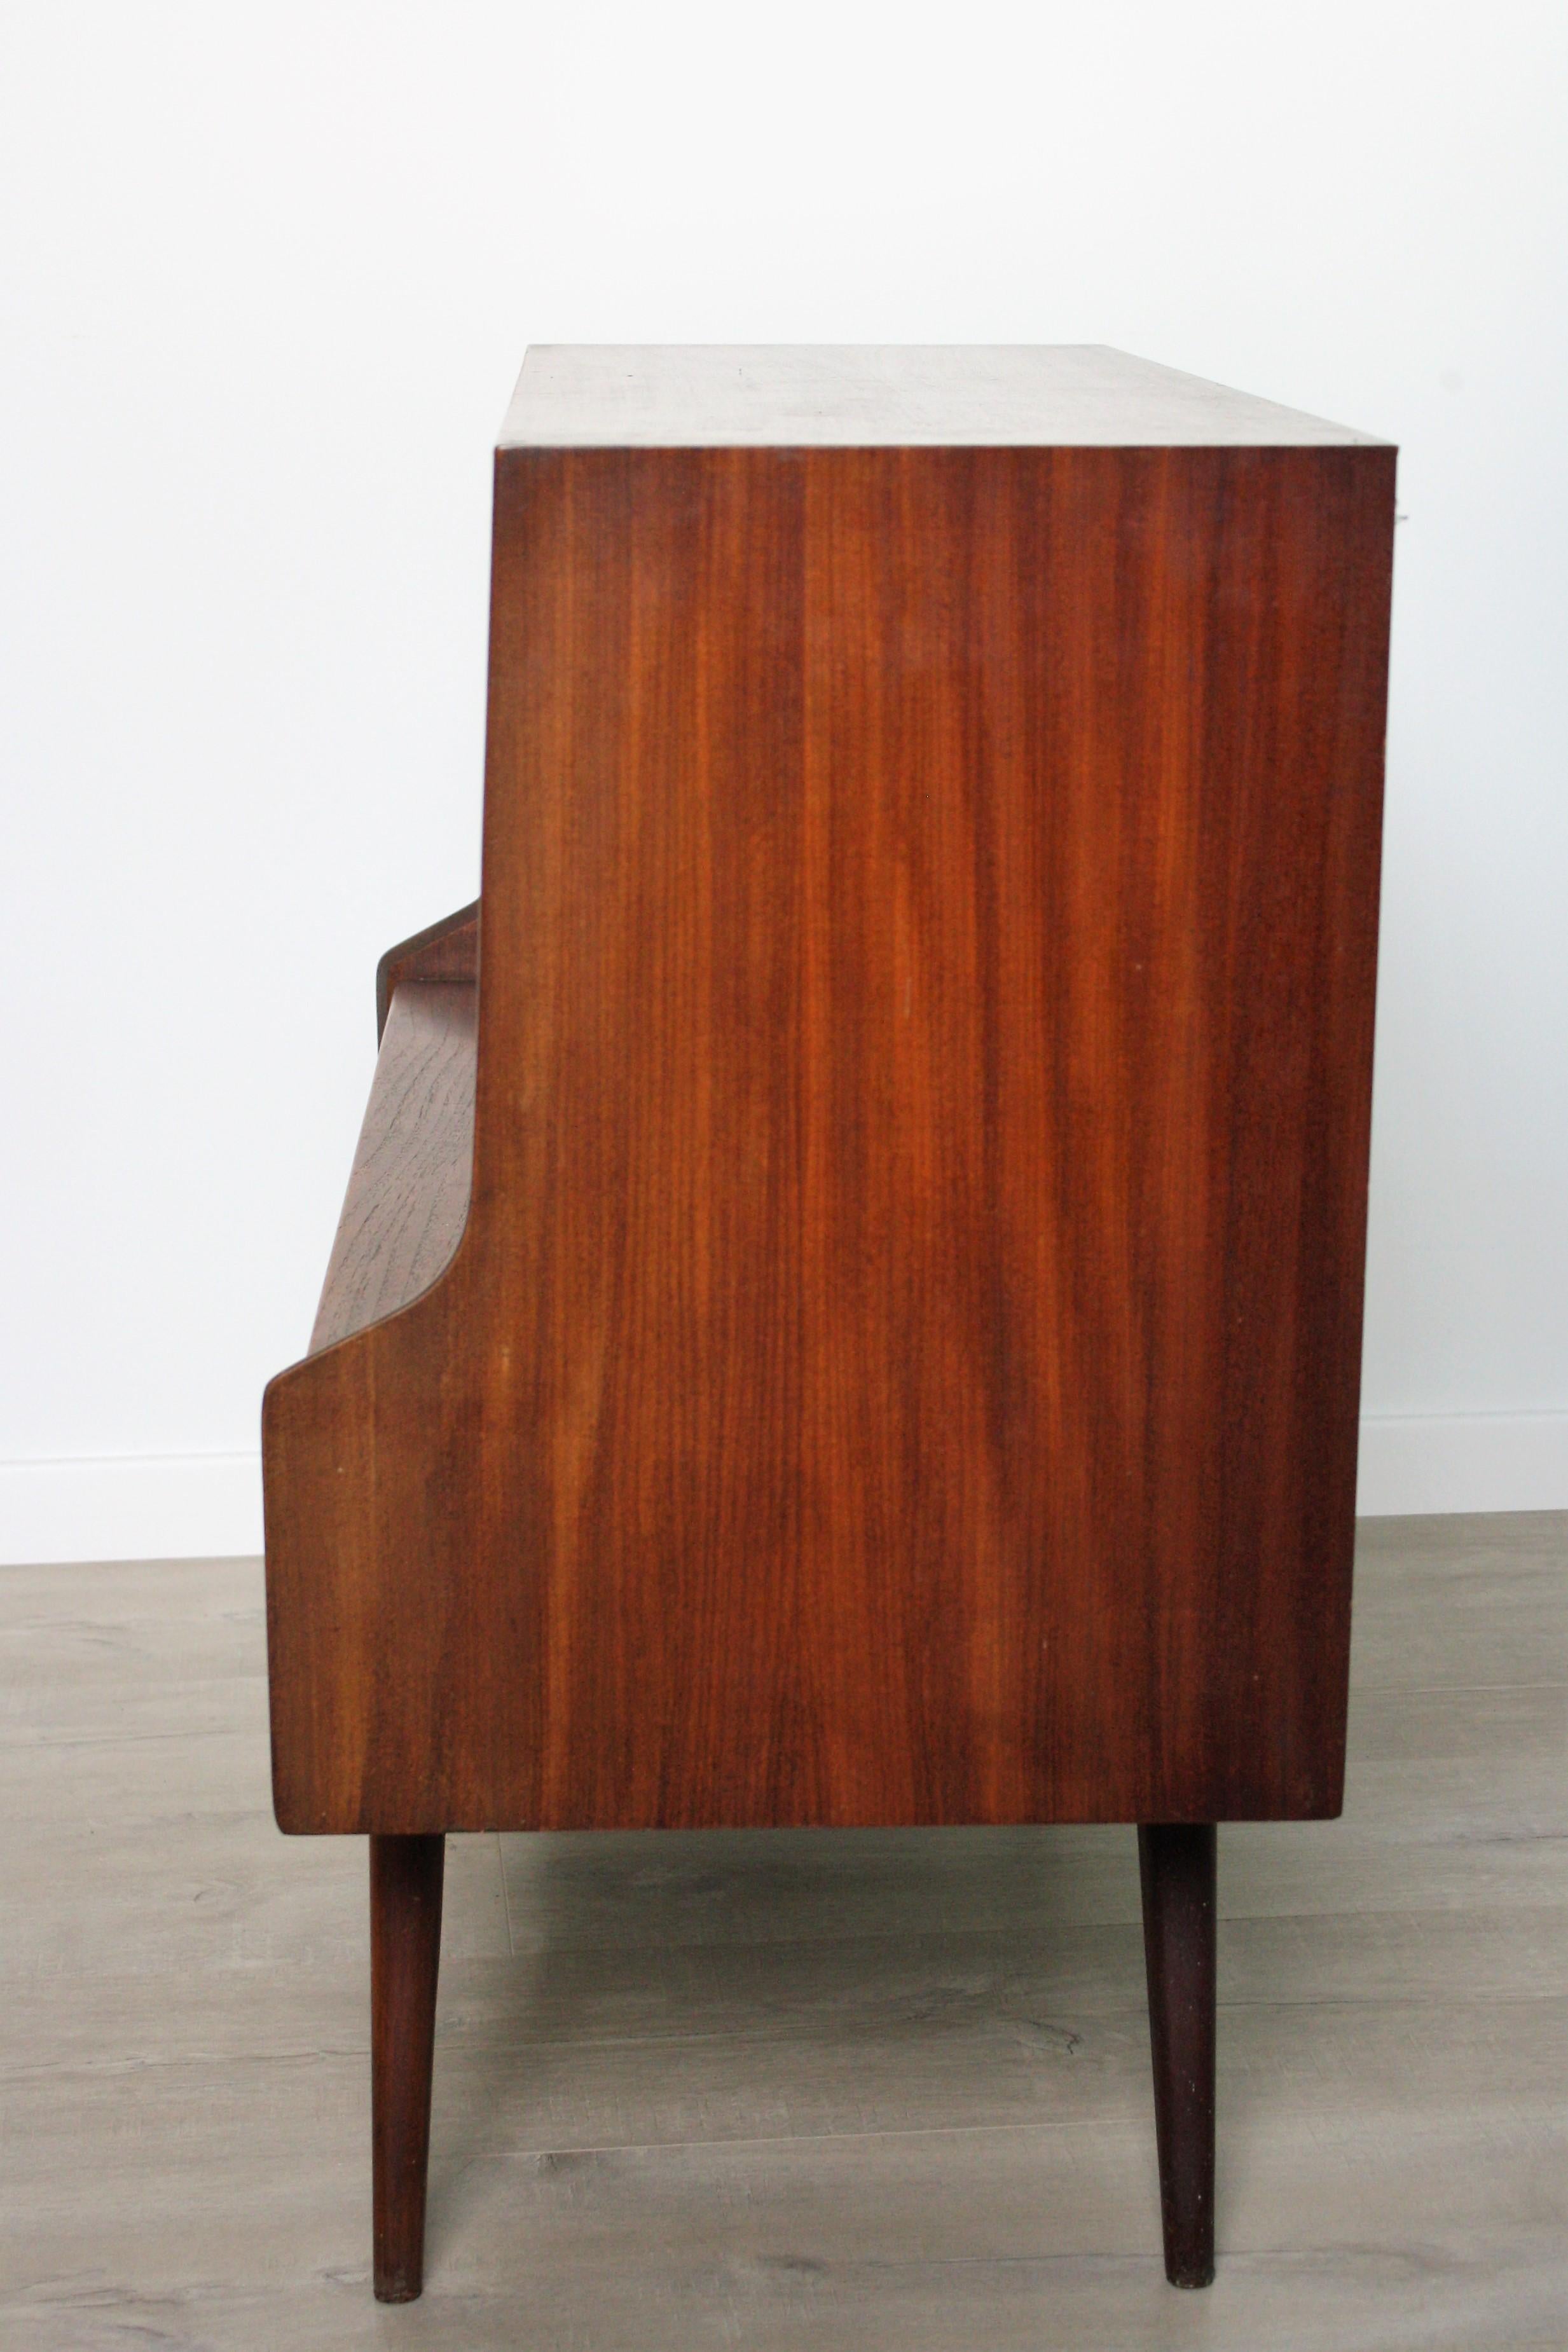 This teak liquor cabinet was designed by Louis van Teeffelen during the 1960s and was made by Wébé in the Netherlands. It features a compartment where bottles and glasses can be stored and has two drawers.

Beautiful design, very good